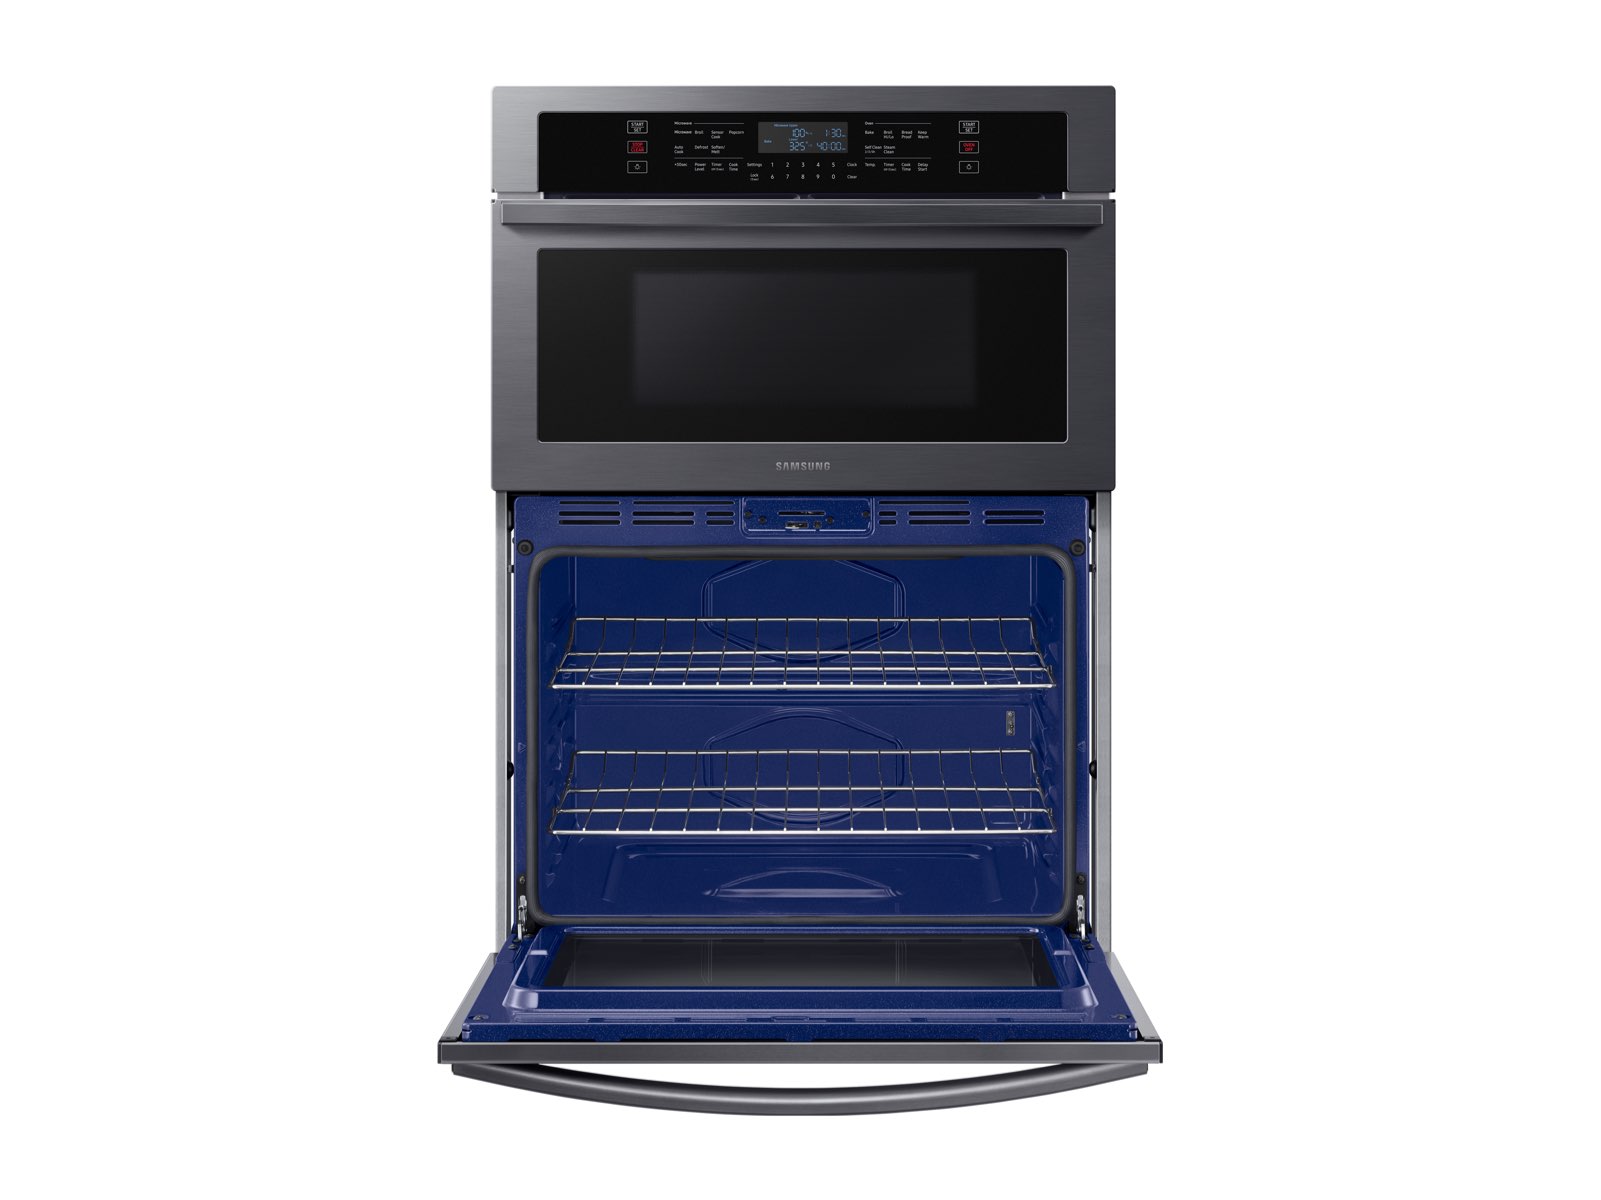 https://image-us.samsung.com/SamsungUS/home/home-appliances/wall-ovens/microwave-combination-oven/pdp/nq70r5511dg-aa/gallery/NQ70R5511DG_13.jpg?$feature-benefit-jpg$